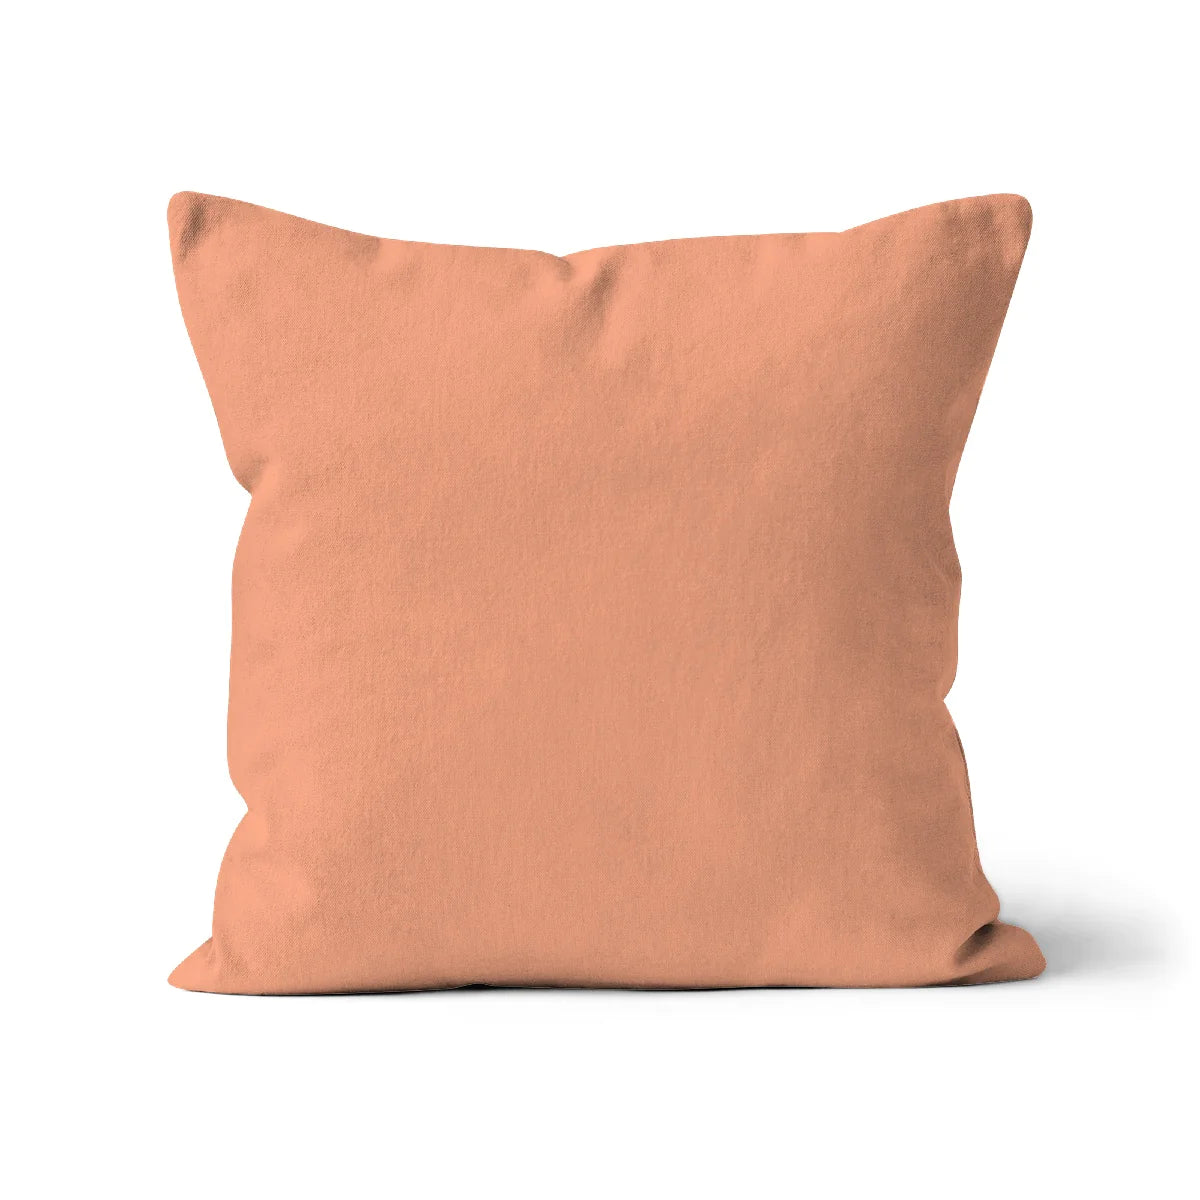 Square plain colour peachy pink cotton cushion cover, sustainably made in the UK, machine washable. Eco-friendly inks, organic homeware